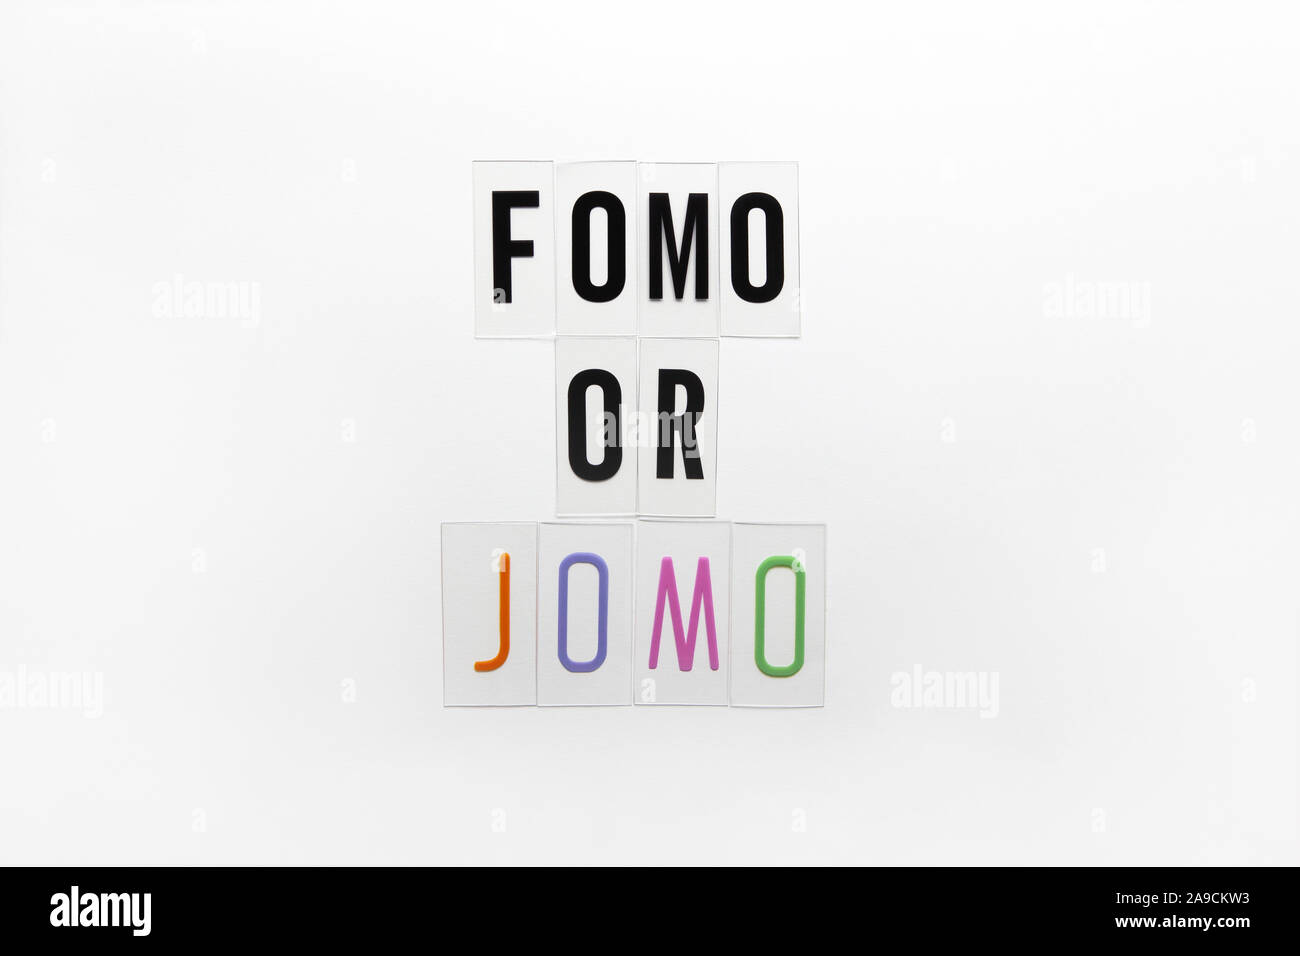 Abbreviation words FOMO, JOMO on transparent plastic on white background. FOMO means Fear Of Missing Out. JOMO - Joy Of Missing Out. Opposition, choic Stock Photo